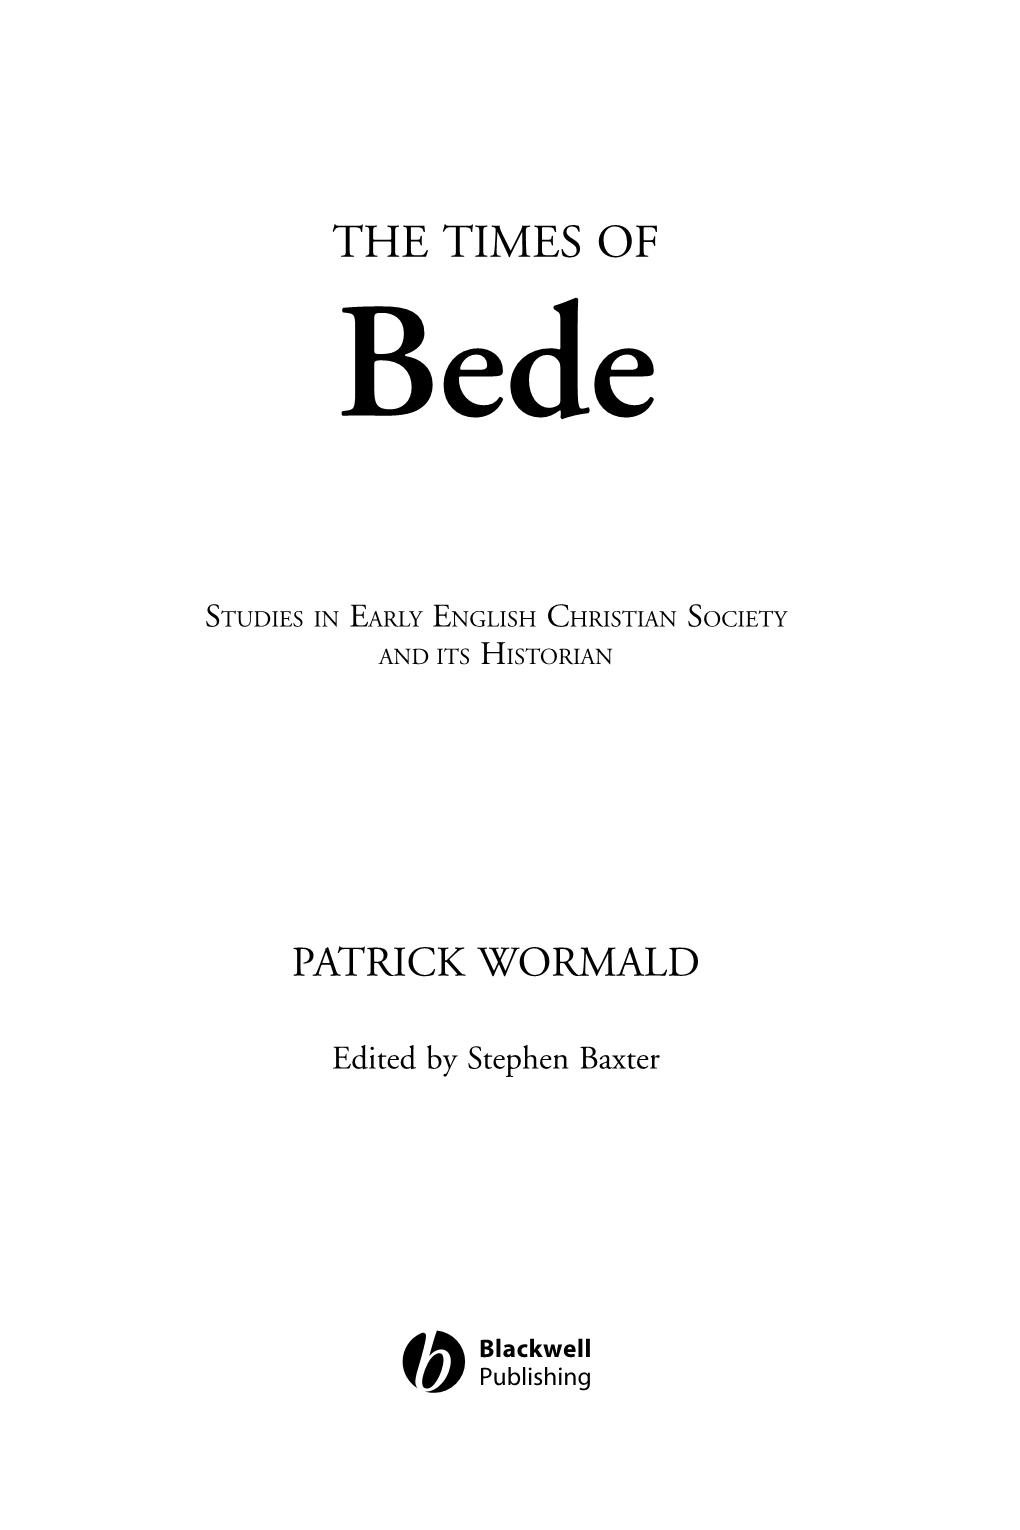 THE TIMES of Bede